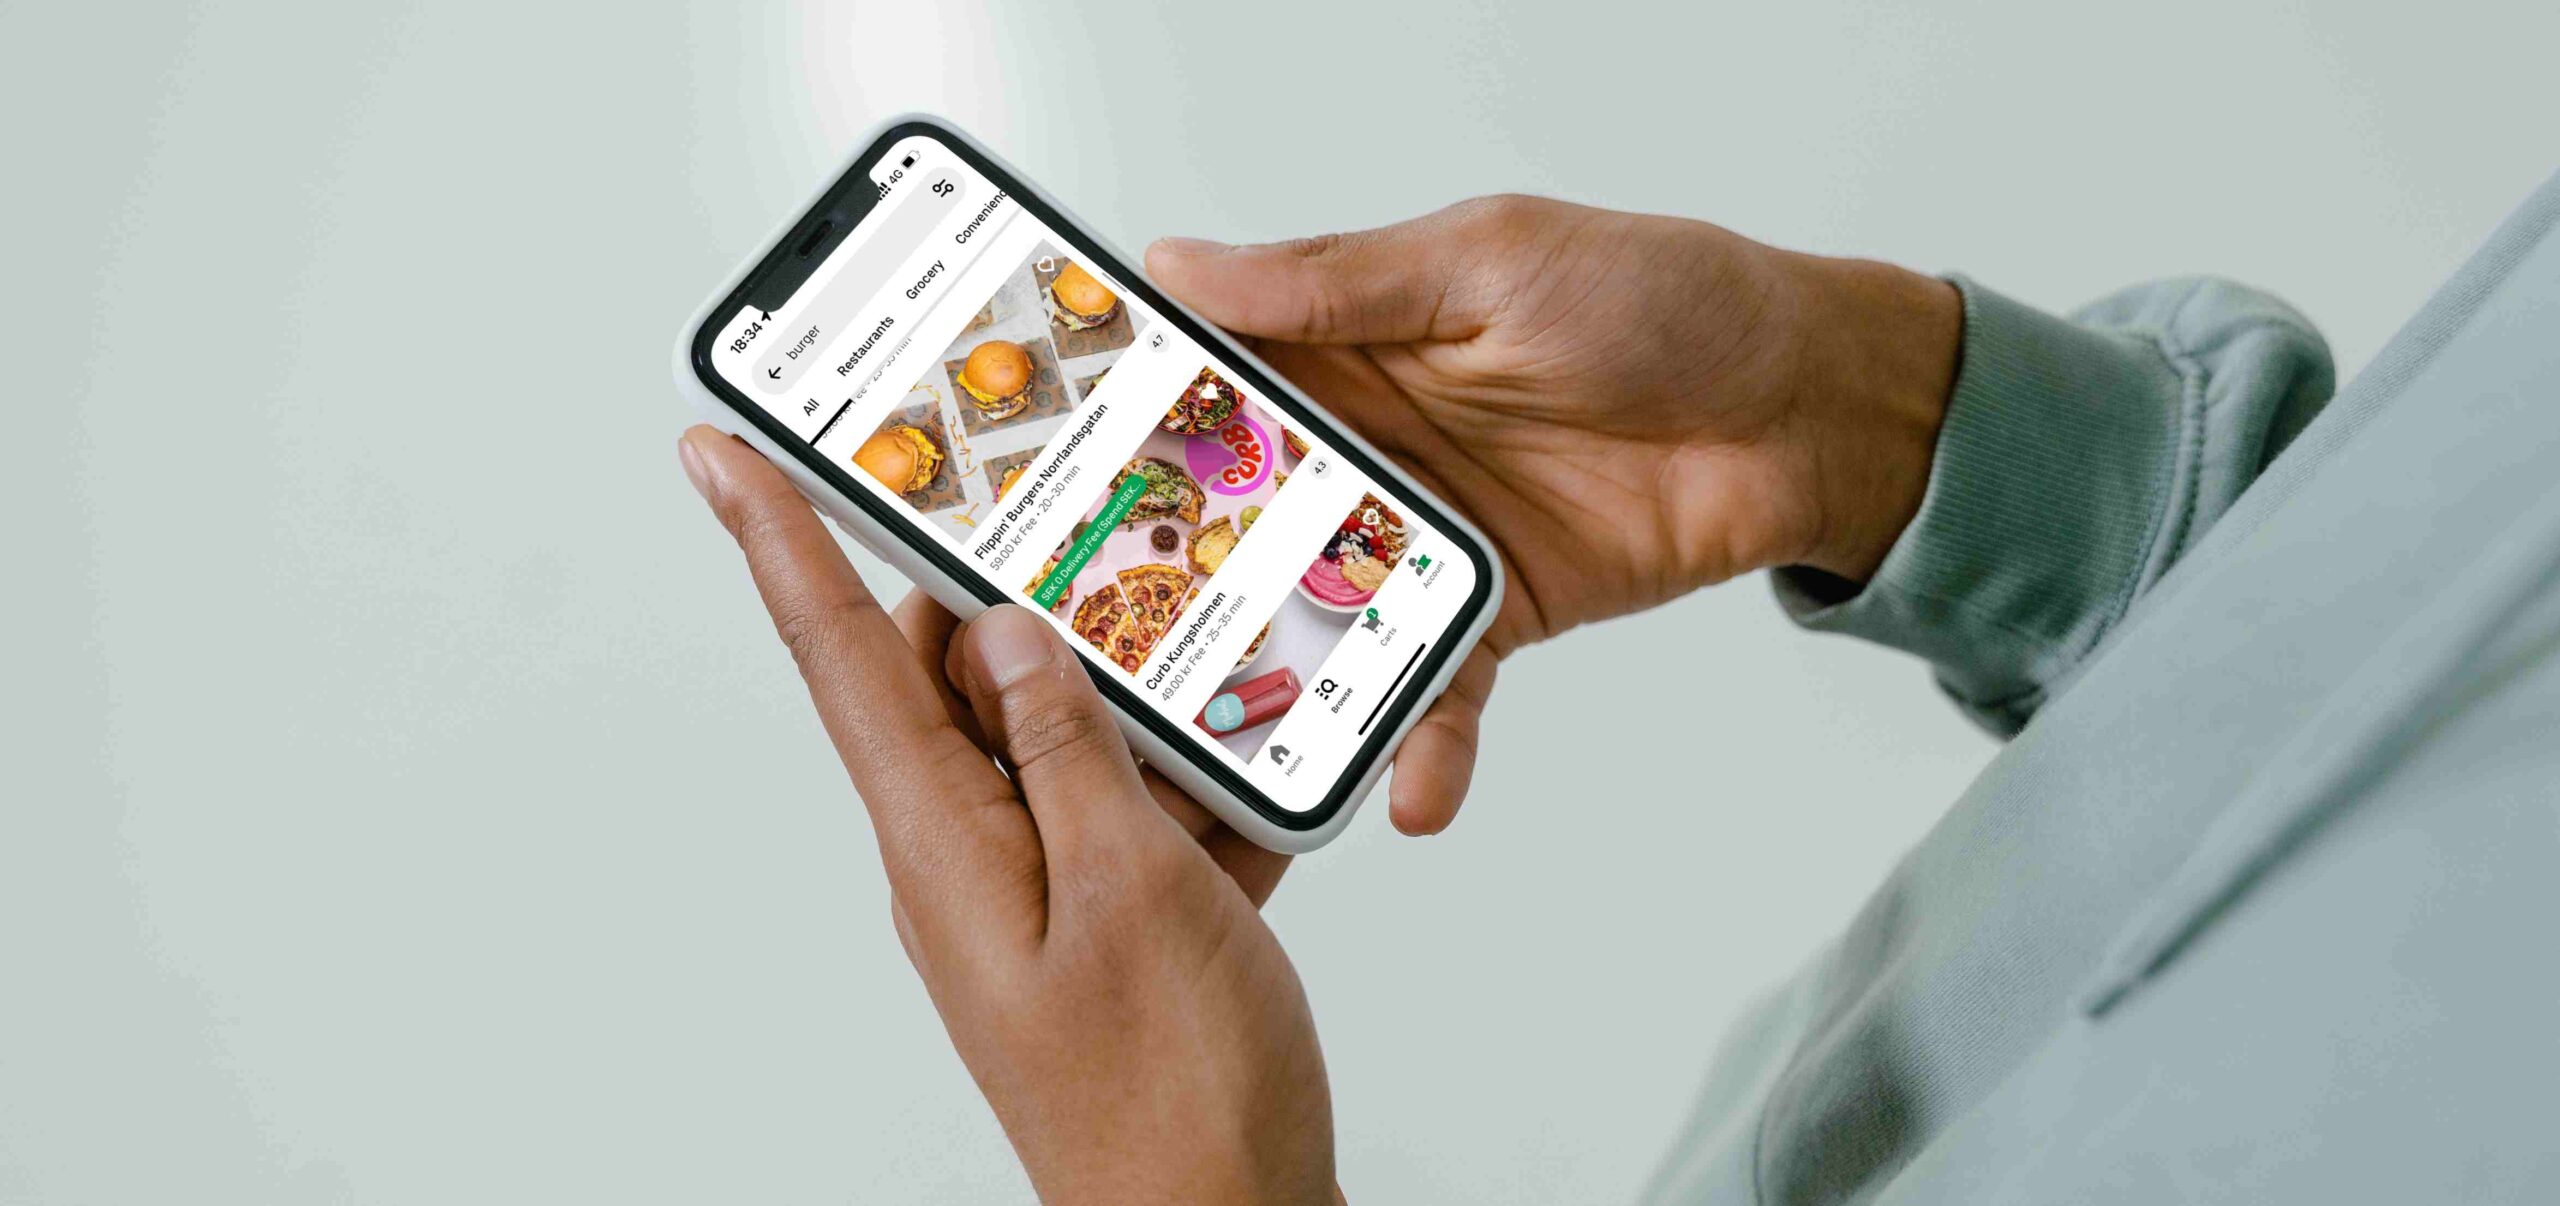 A person holding a smartphone displaying UberEats online restaurants